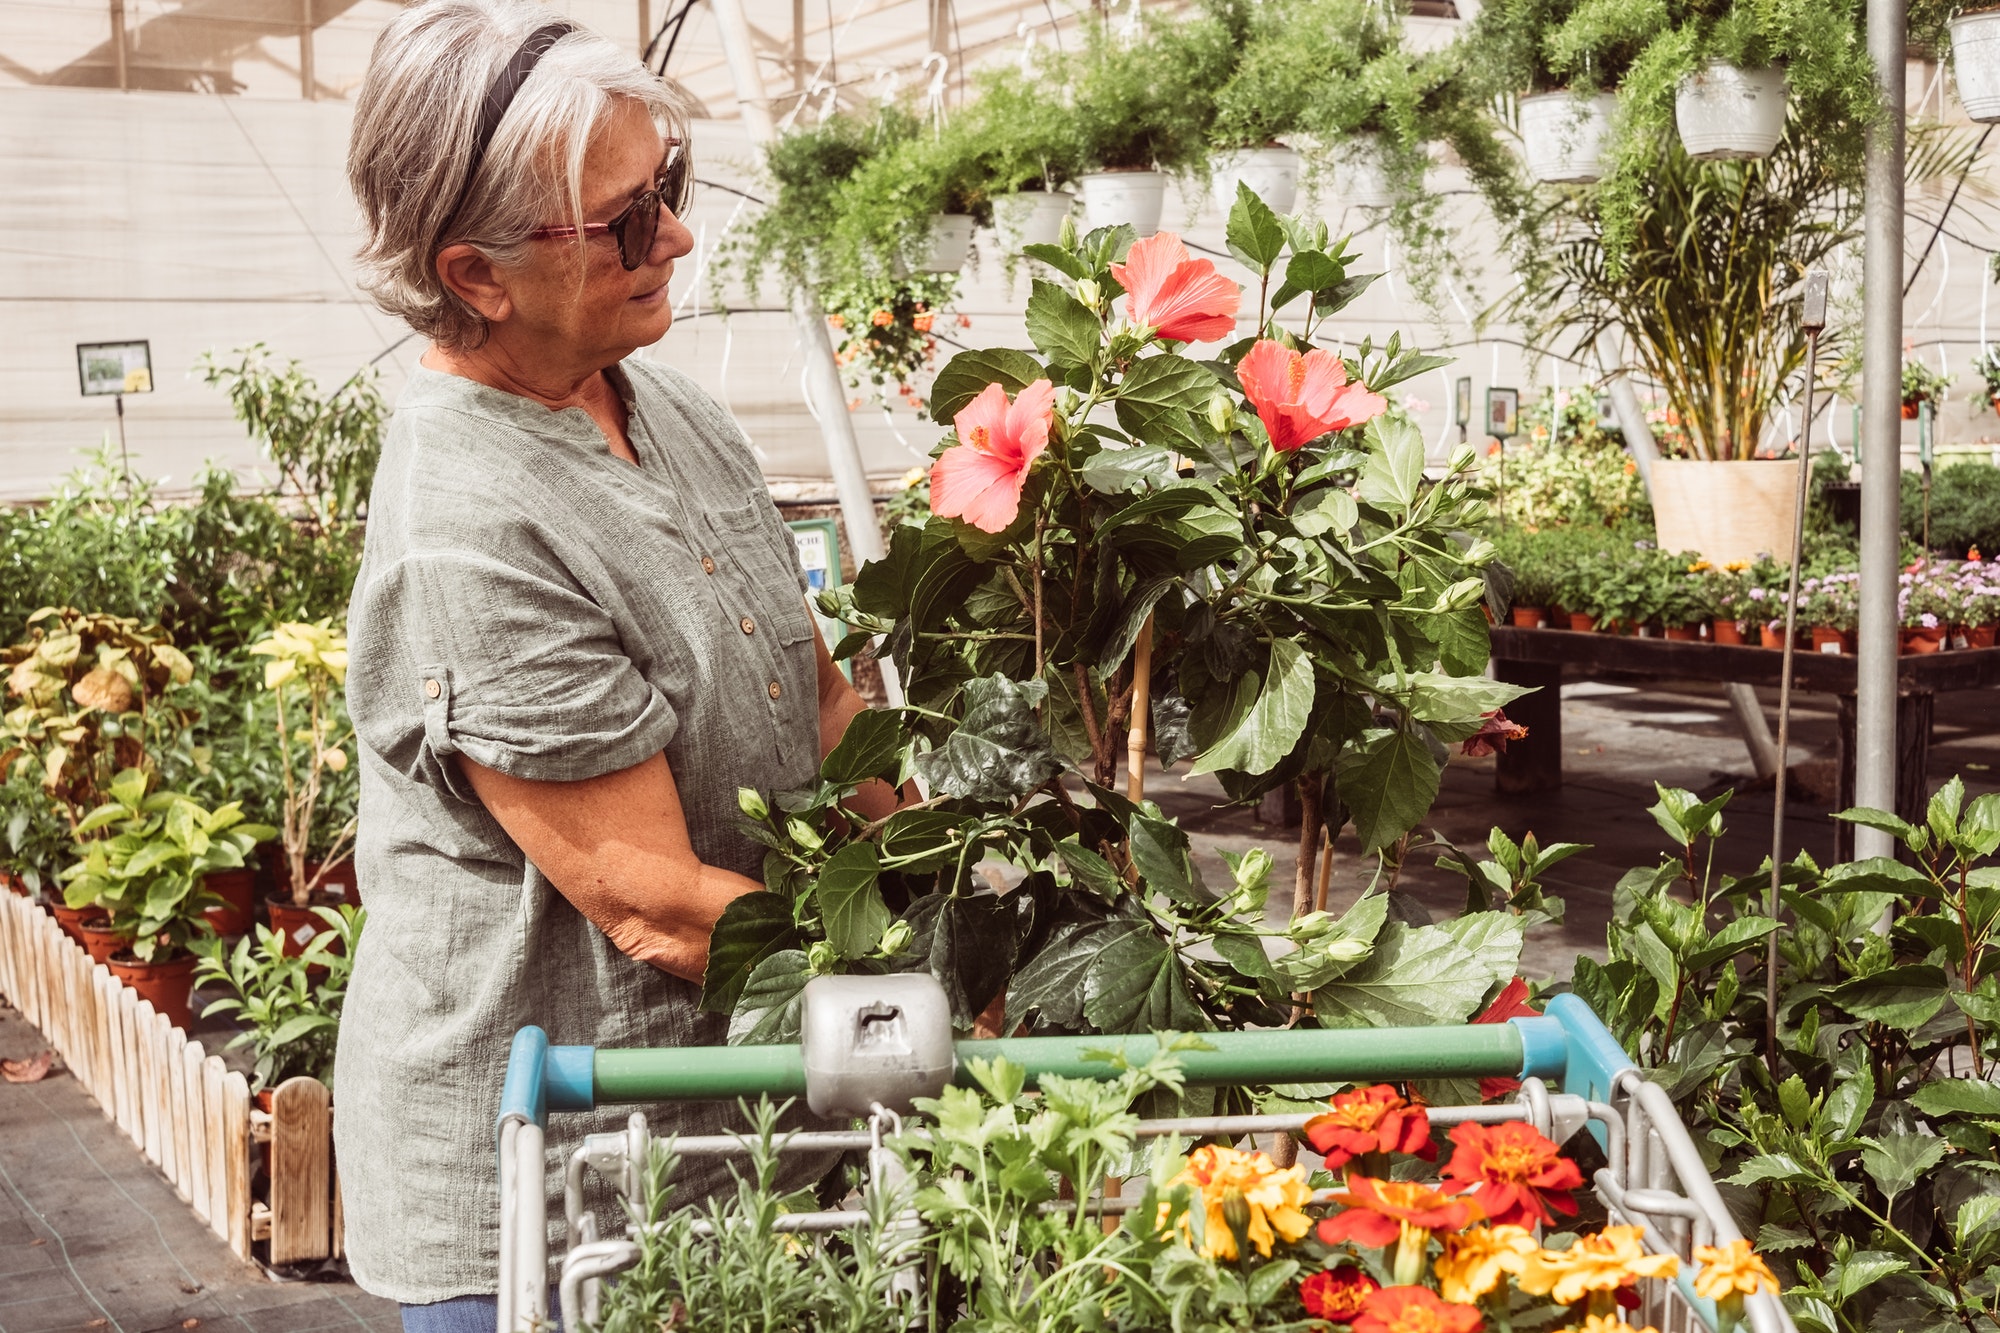 Adult senior woman, lover of flowers, enjoying purchases in the plant nursery pushing a cart